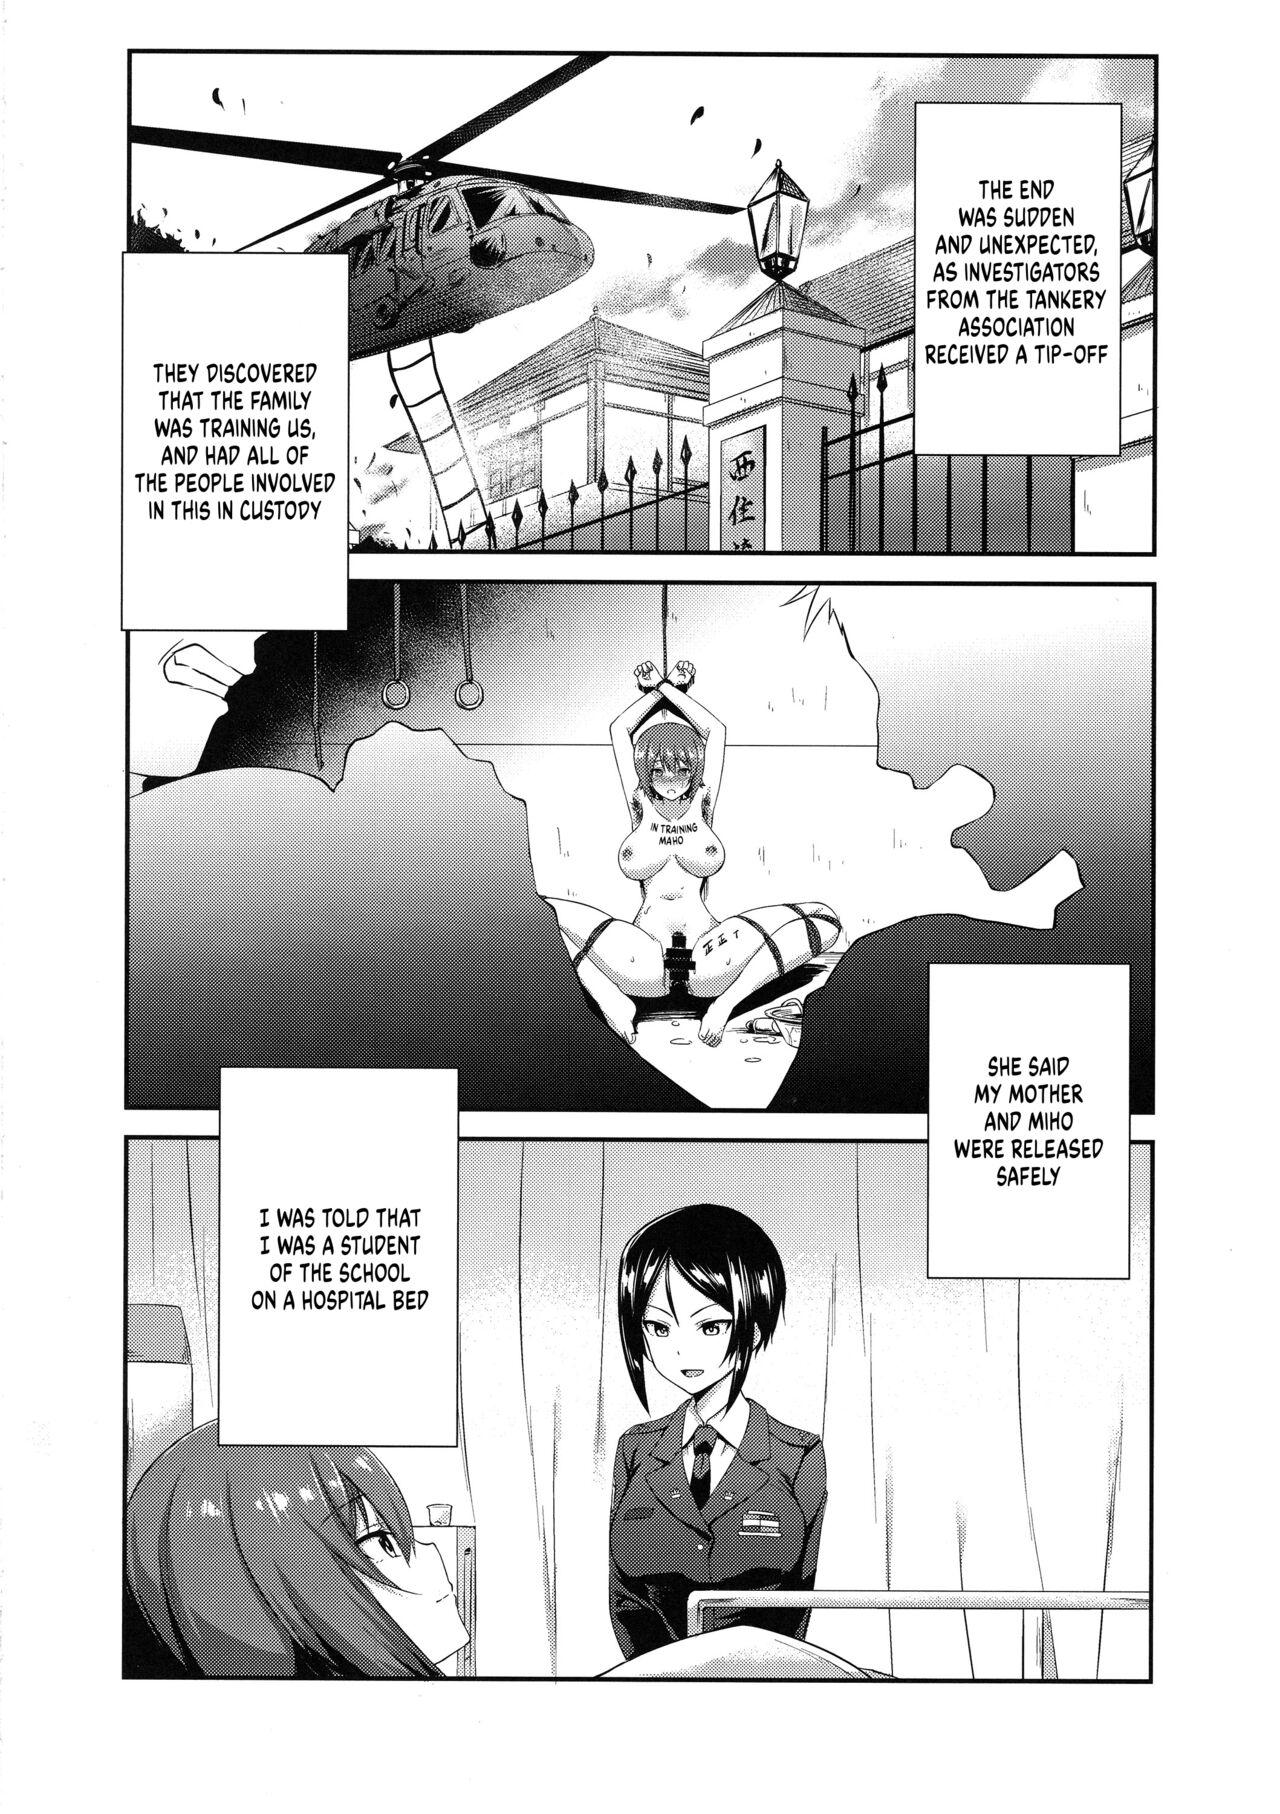 Flexible The Way How a Matriarch is Brought Up - Maho's Case, Top - Girls und panzer Oral Sex - Page 5